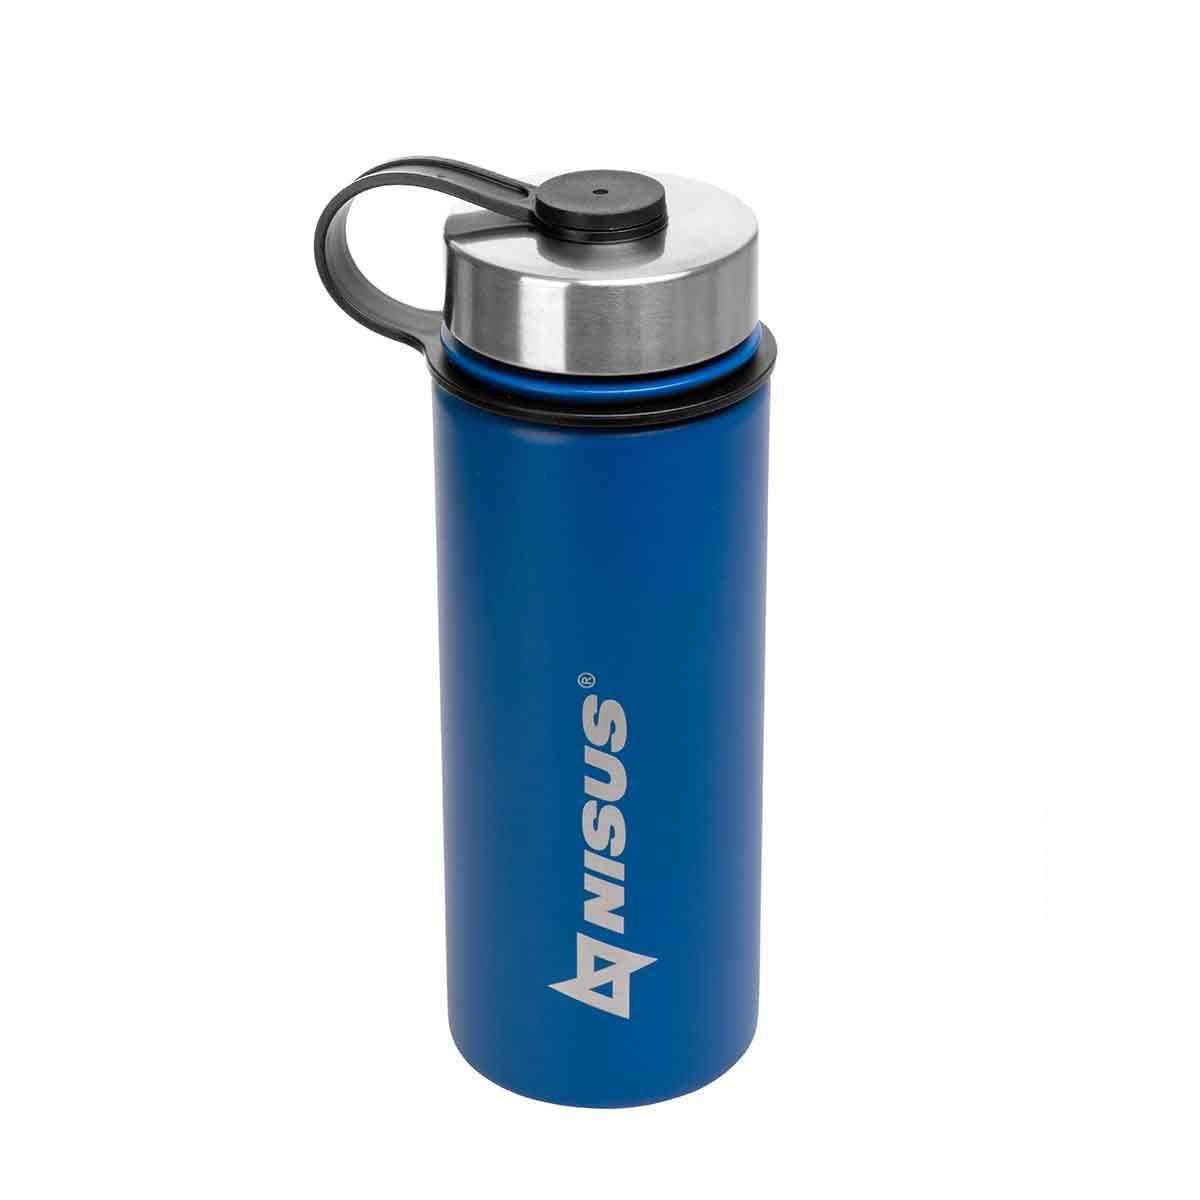 Stainless Steel Insulated Sport Water Bottle with 3 Lid Types, 18 oz, Blue